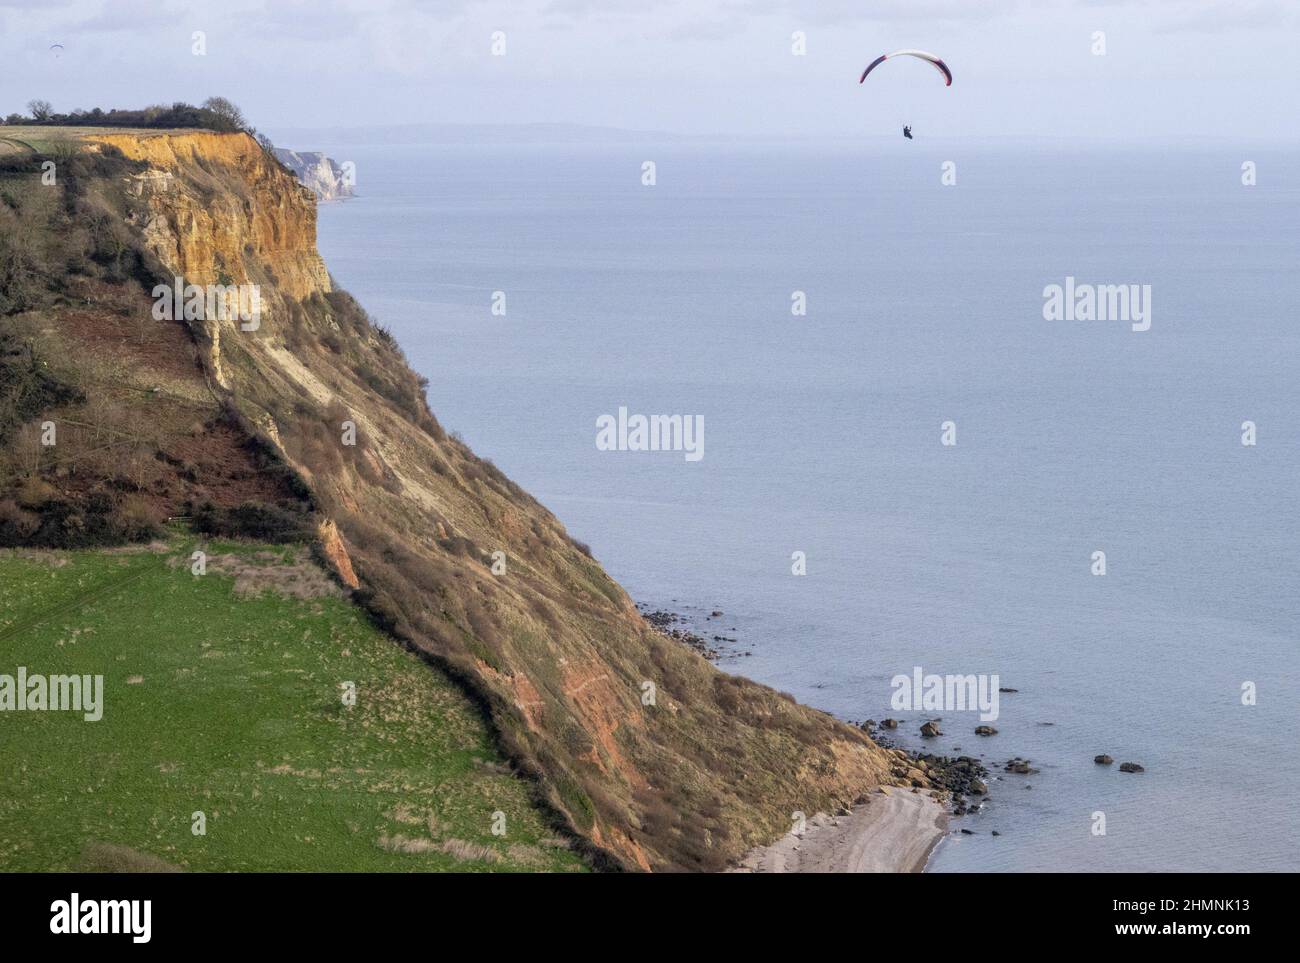 Sidmouth, Devon, 11th Feb 22 A paraglider takes advantage of the warm, still weather to fly out over Salcombe Mouth, near Sidmouth. Credit: Photo Central/Alamy Live News Stock Photo